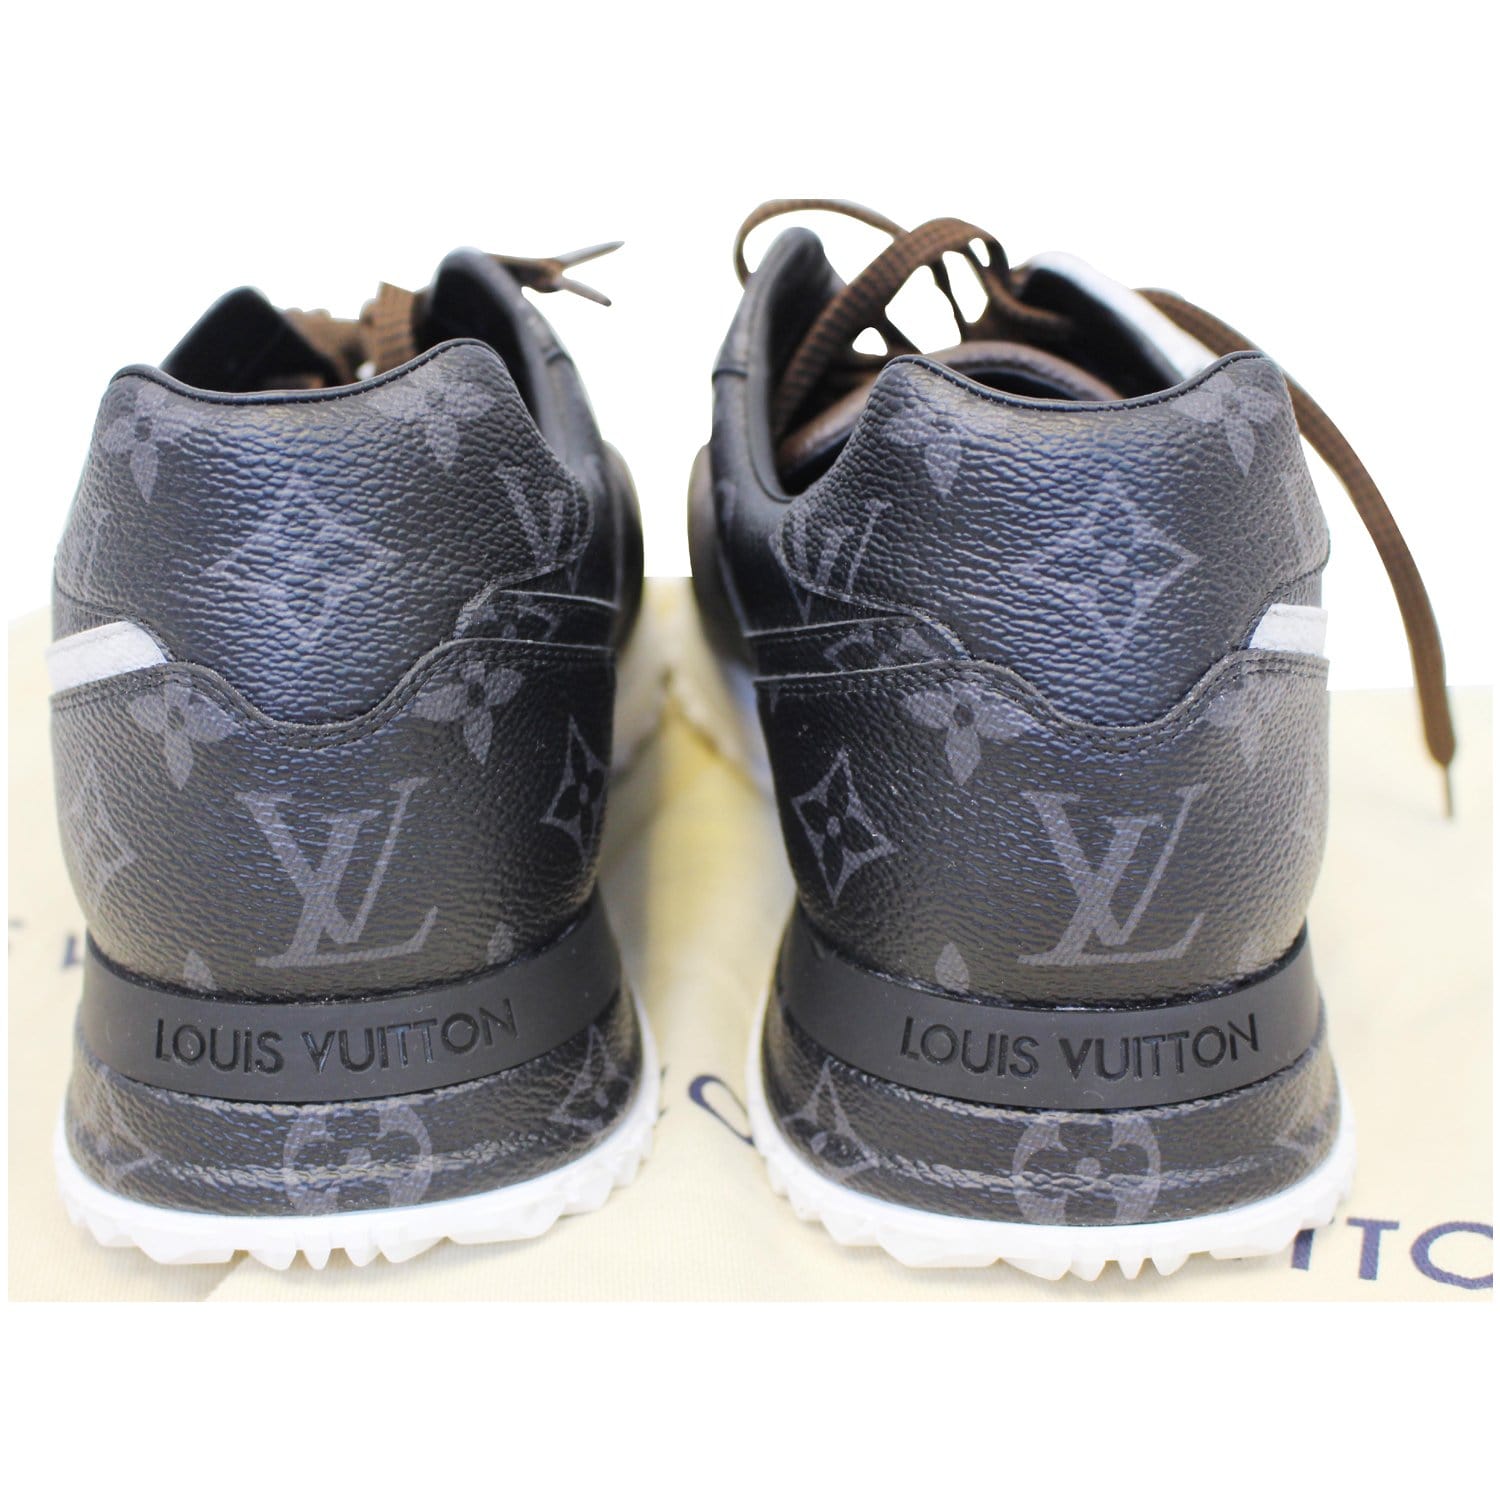 Louis Vuitton Sneakers in Central Division for sale ▷ Prices on